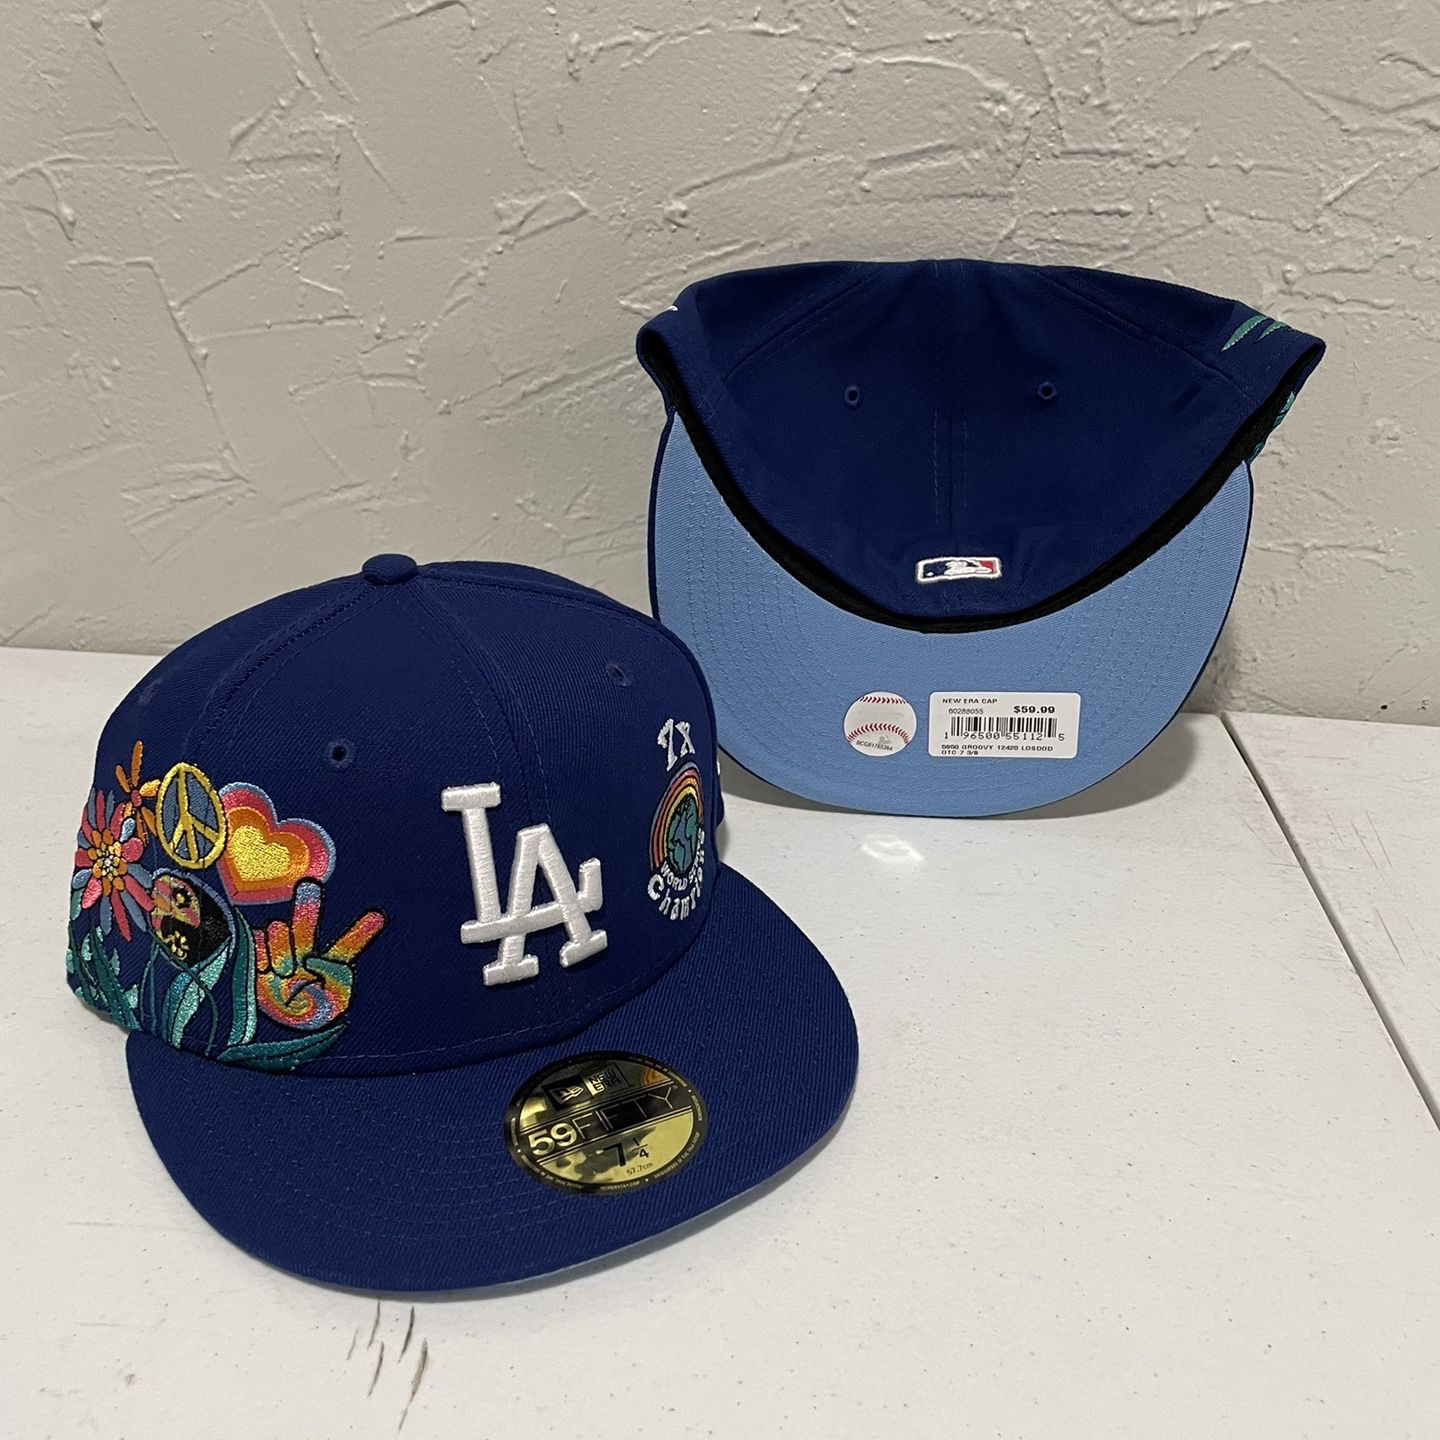 Light Blue Dodgers Fitted Hat 7 1/2 for Sale in Irwindale, CA - OfferUp